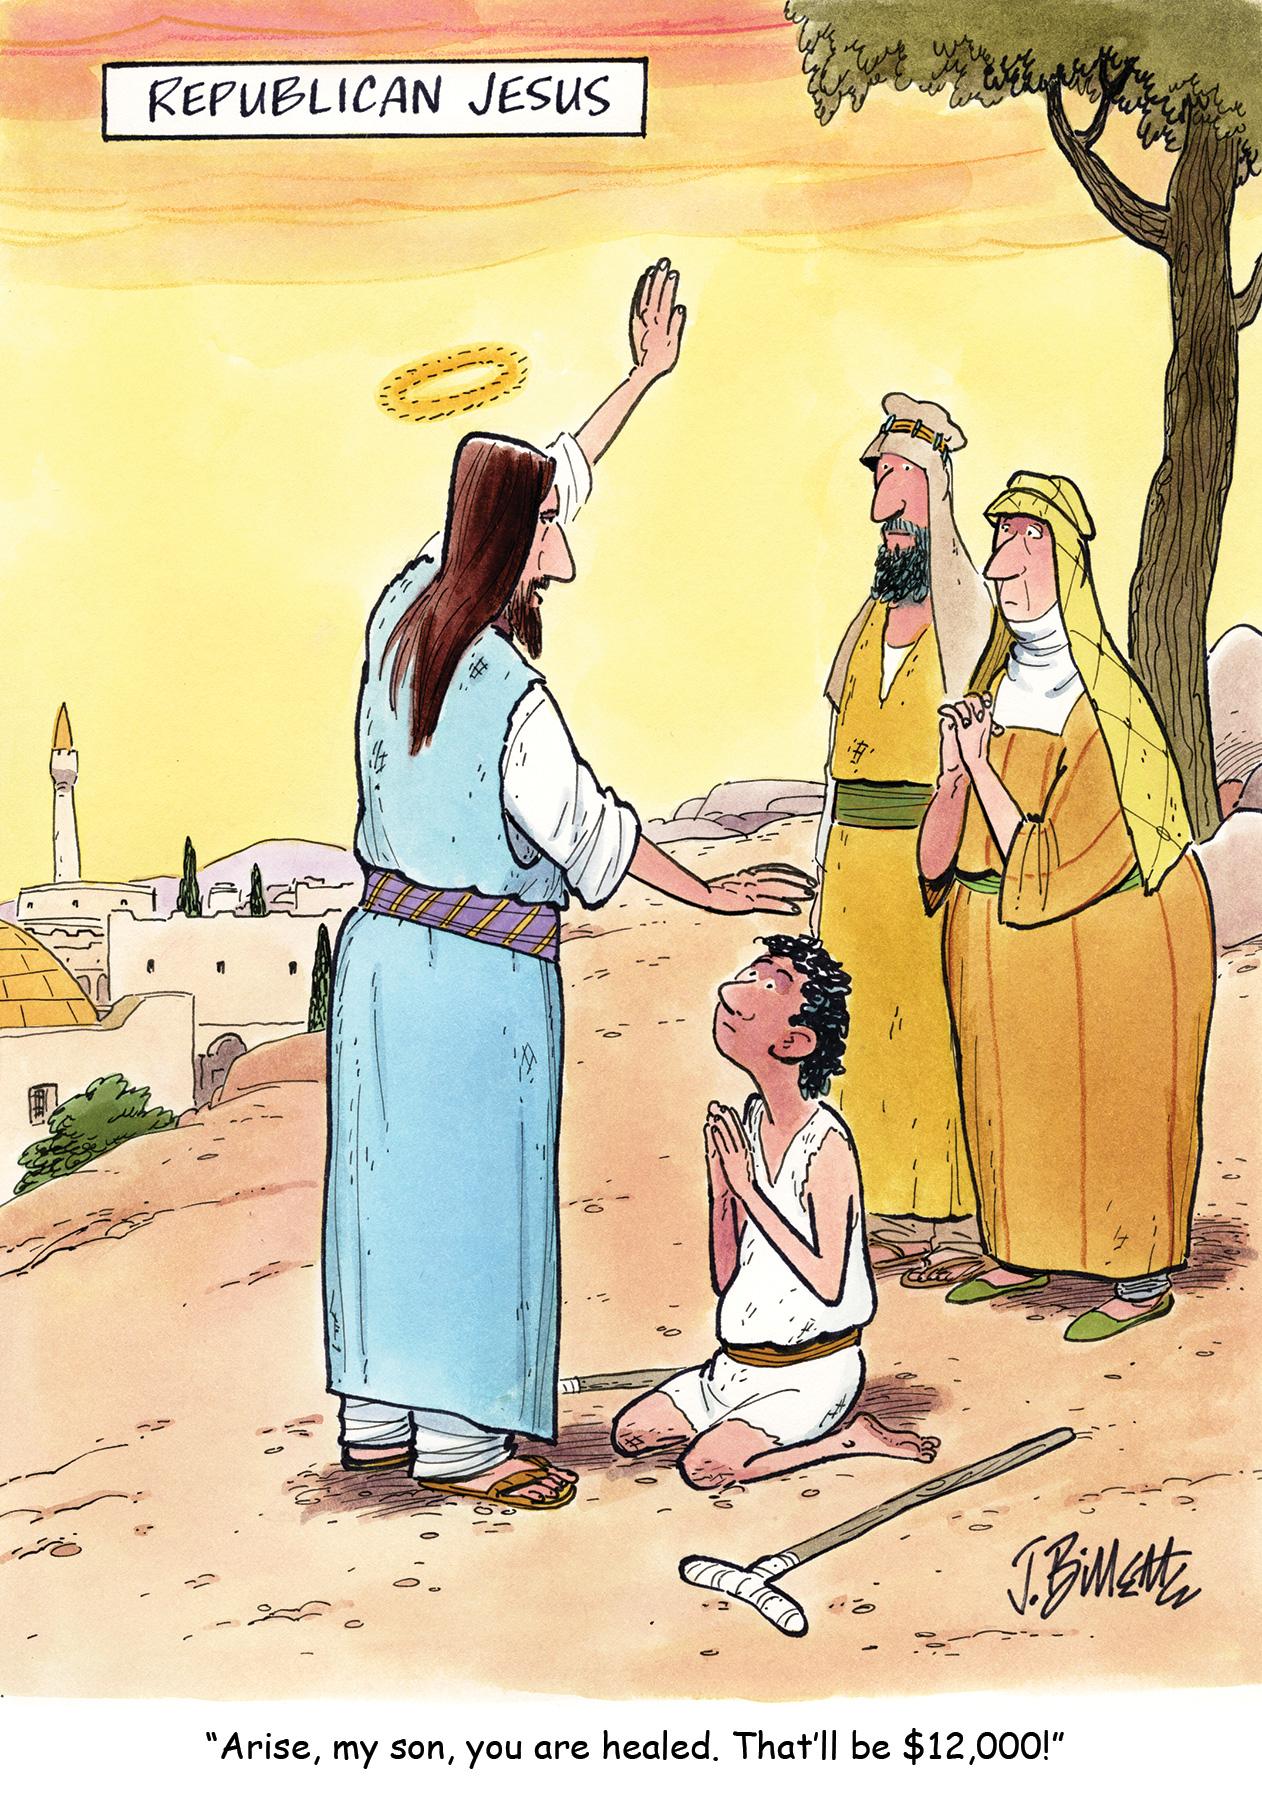 “Arise, my son, you are healed. That’ll be $12,000!”